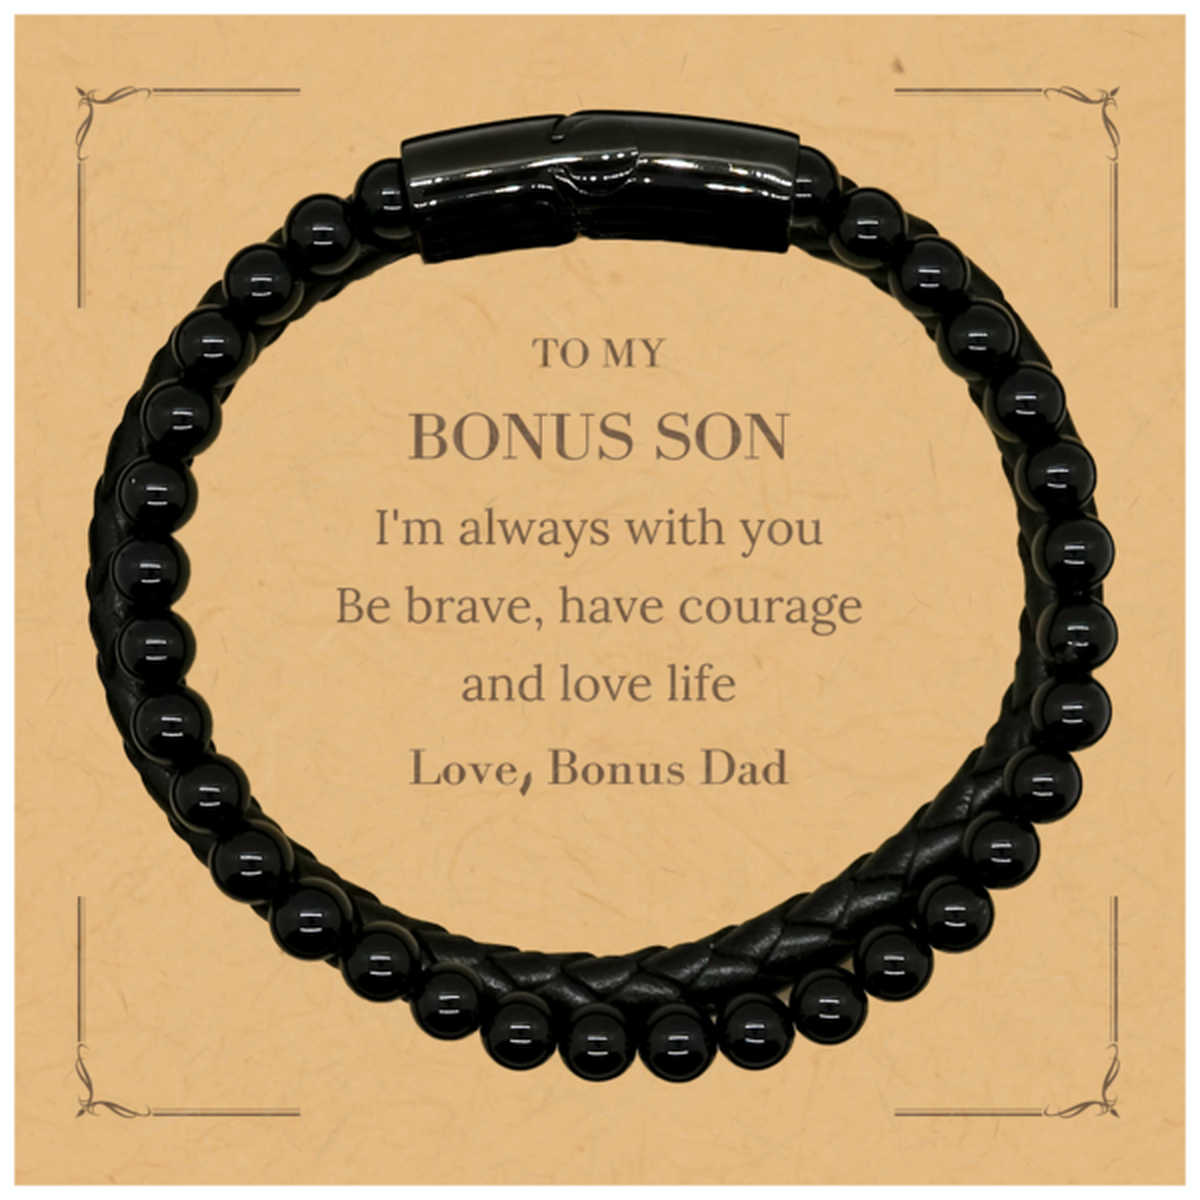 To My Bonus Son Gifts from Bonus Dad, Unique Stone Leather Bracelets Inspirational Christmas Birthday Graduation Gifts for Bonus Son I'm always with you. Be brave, have courage and love life. Love, Bonus Dad